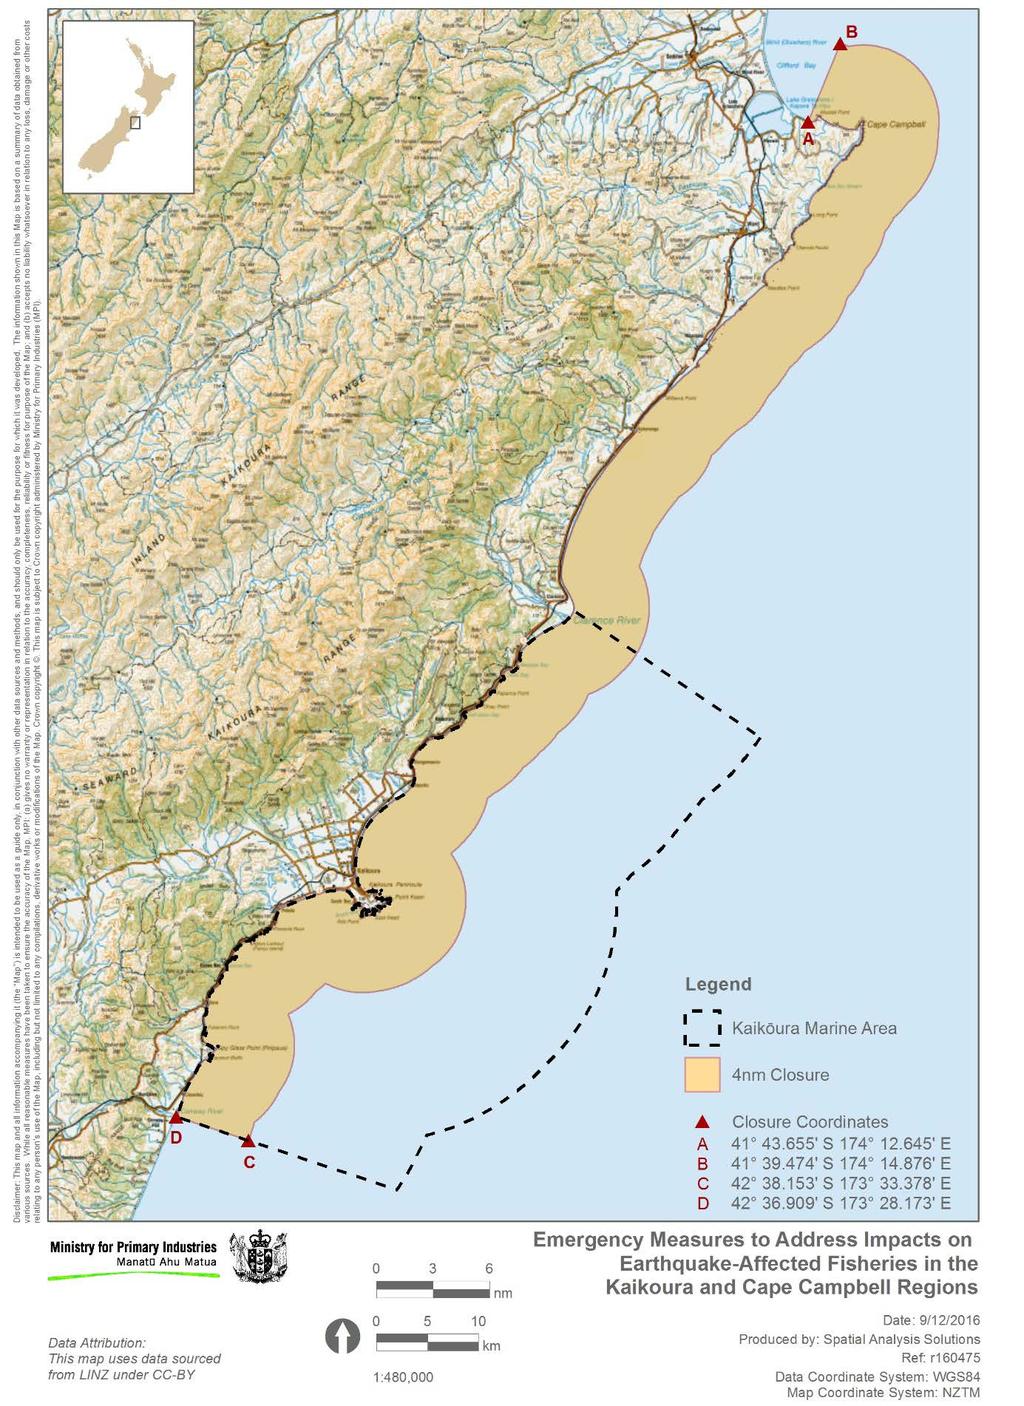 Figure 2: Map of the earthquake-affected area closed under s 16 of the Fisheries